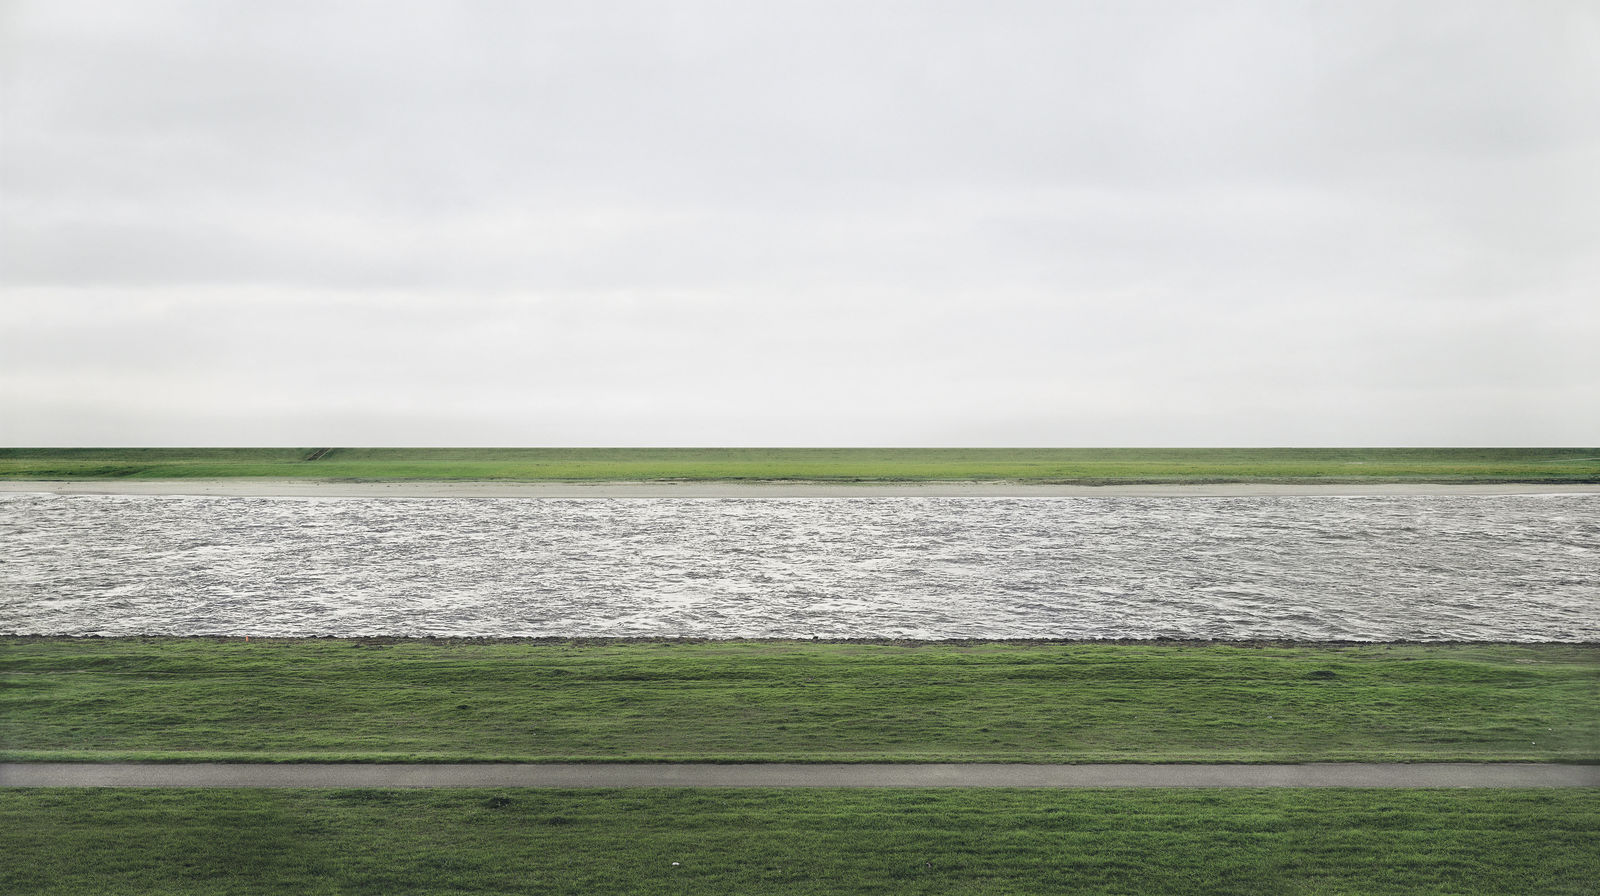 Andreas Gursky. Rhine II. 1999. Photo. Private collection